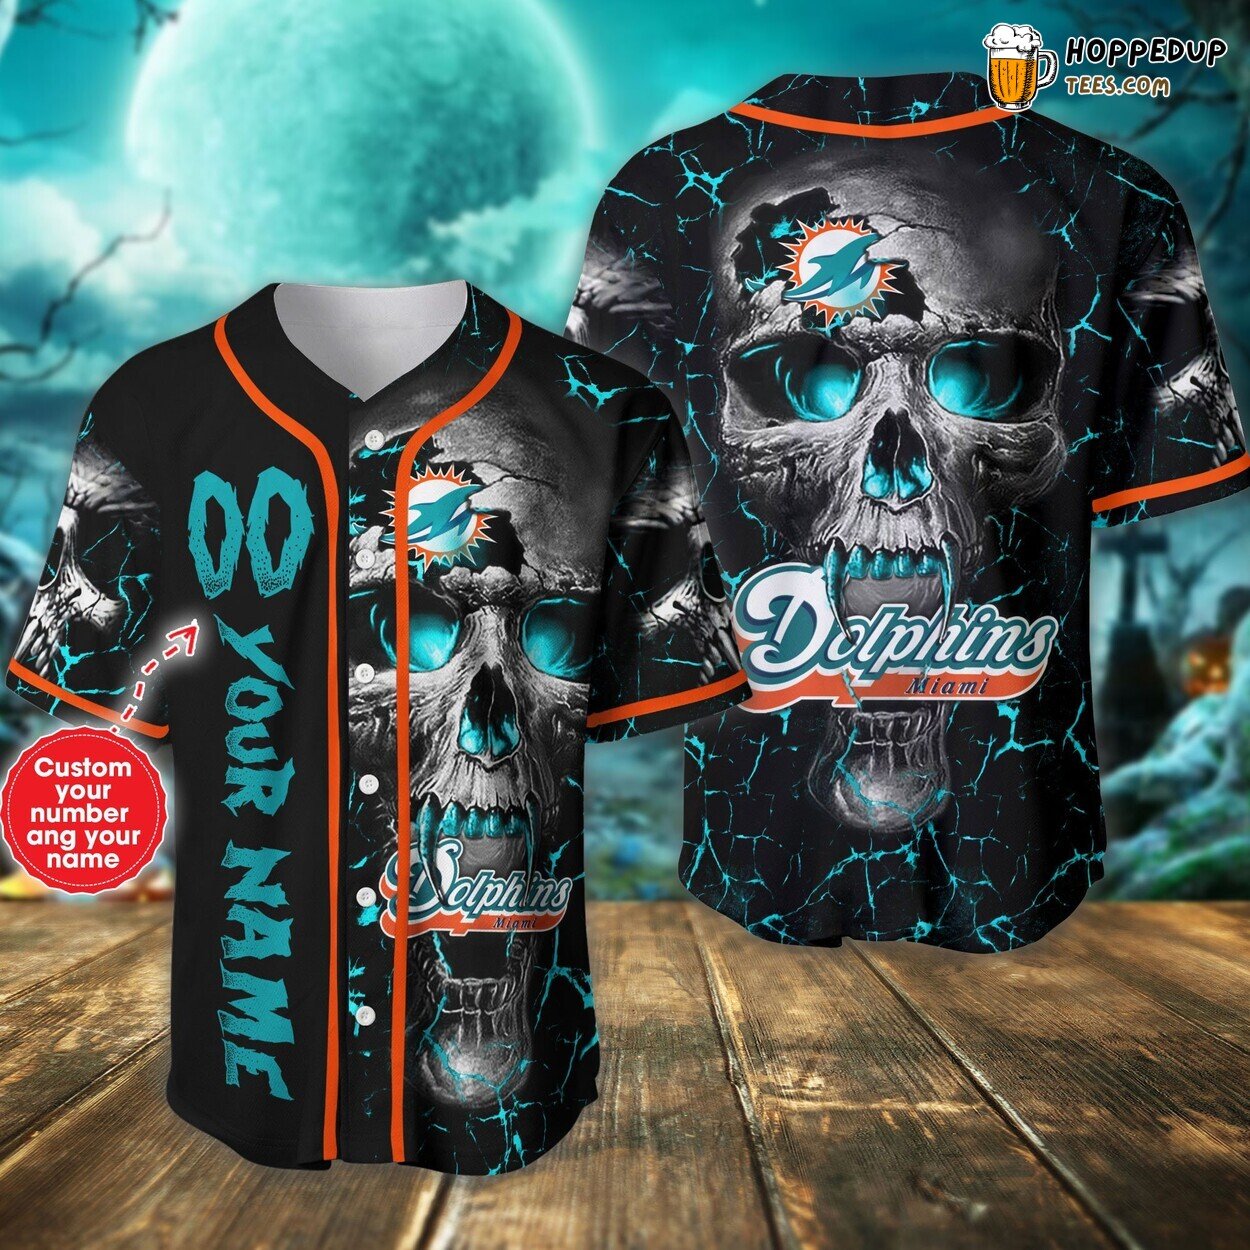 Miami Dolphins Shop - Miami Dolphins Distinctive Style 3D Personalized NFL Baseball Jersey Shirt